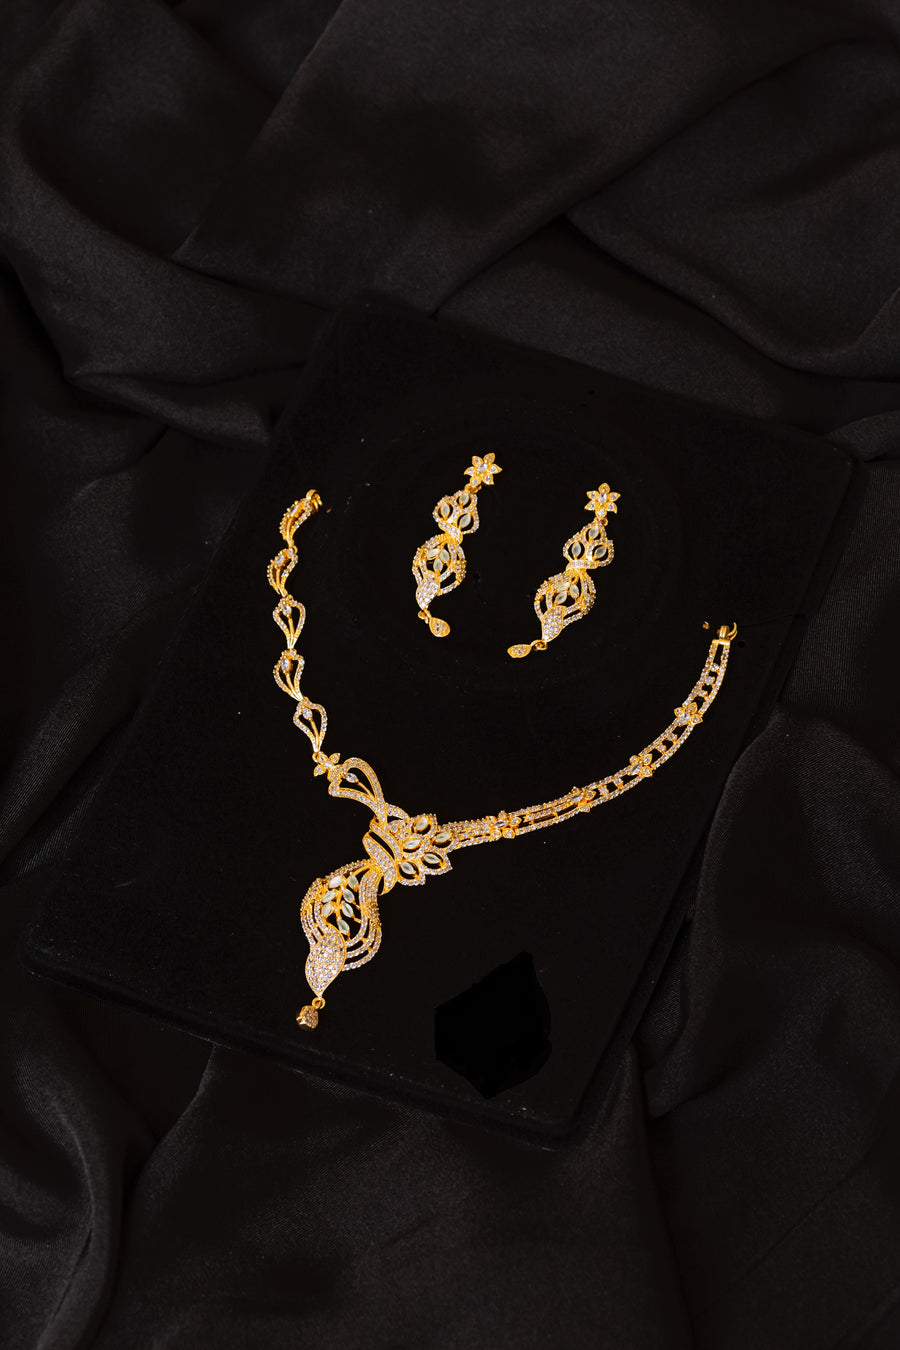 Artificial necklace and earrings D2- Areeba's Couture